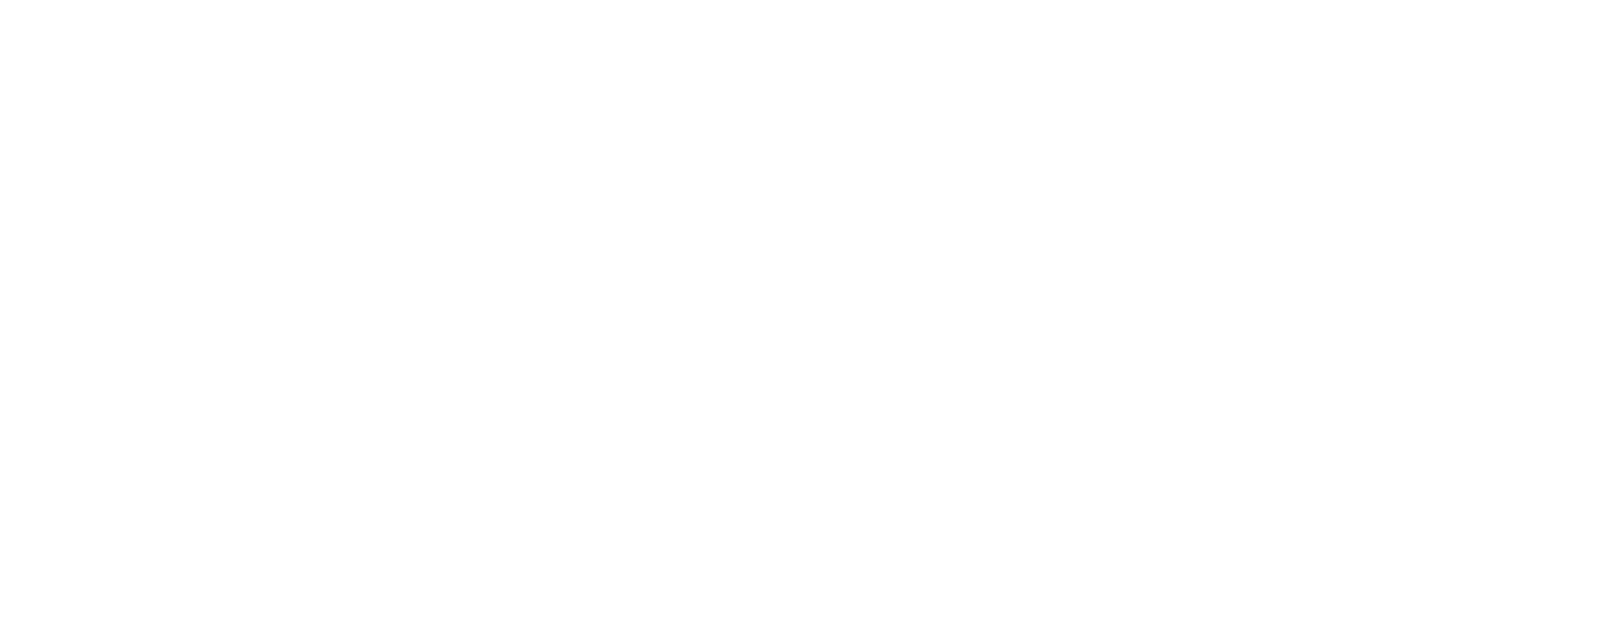 Tales of Soulofox